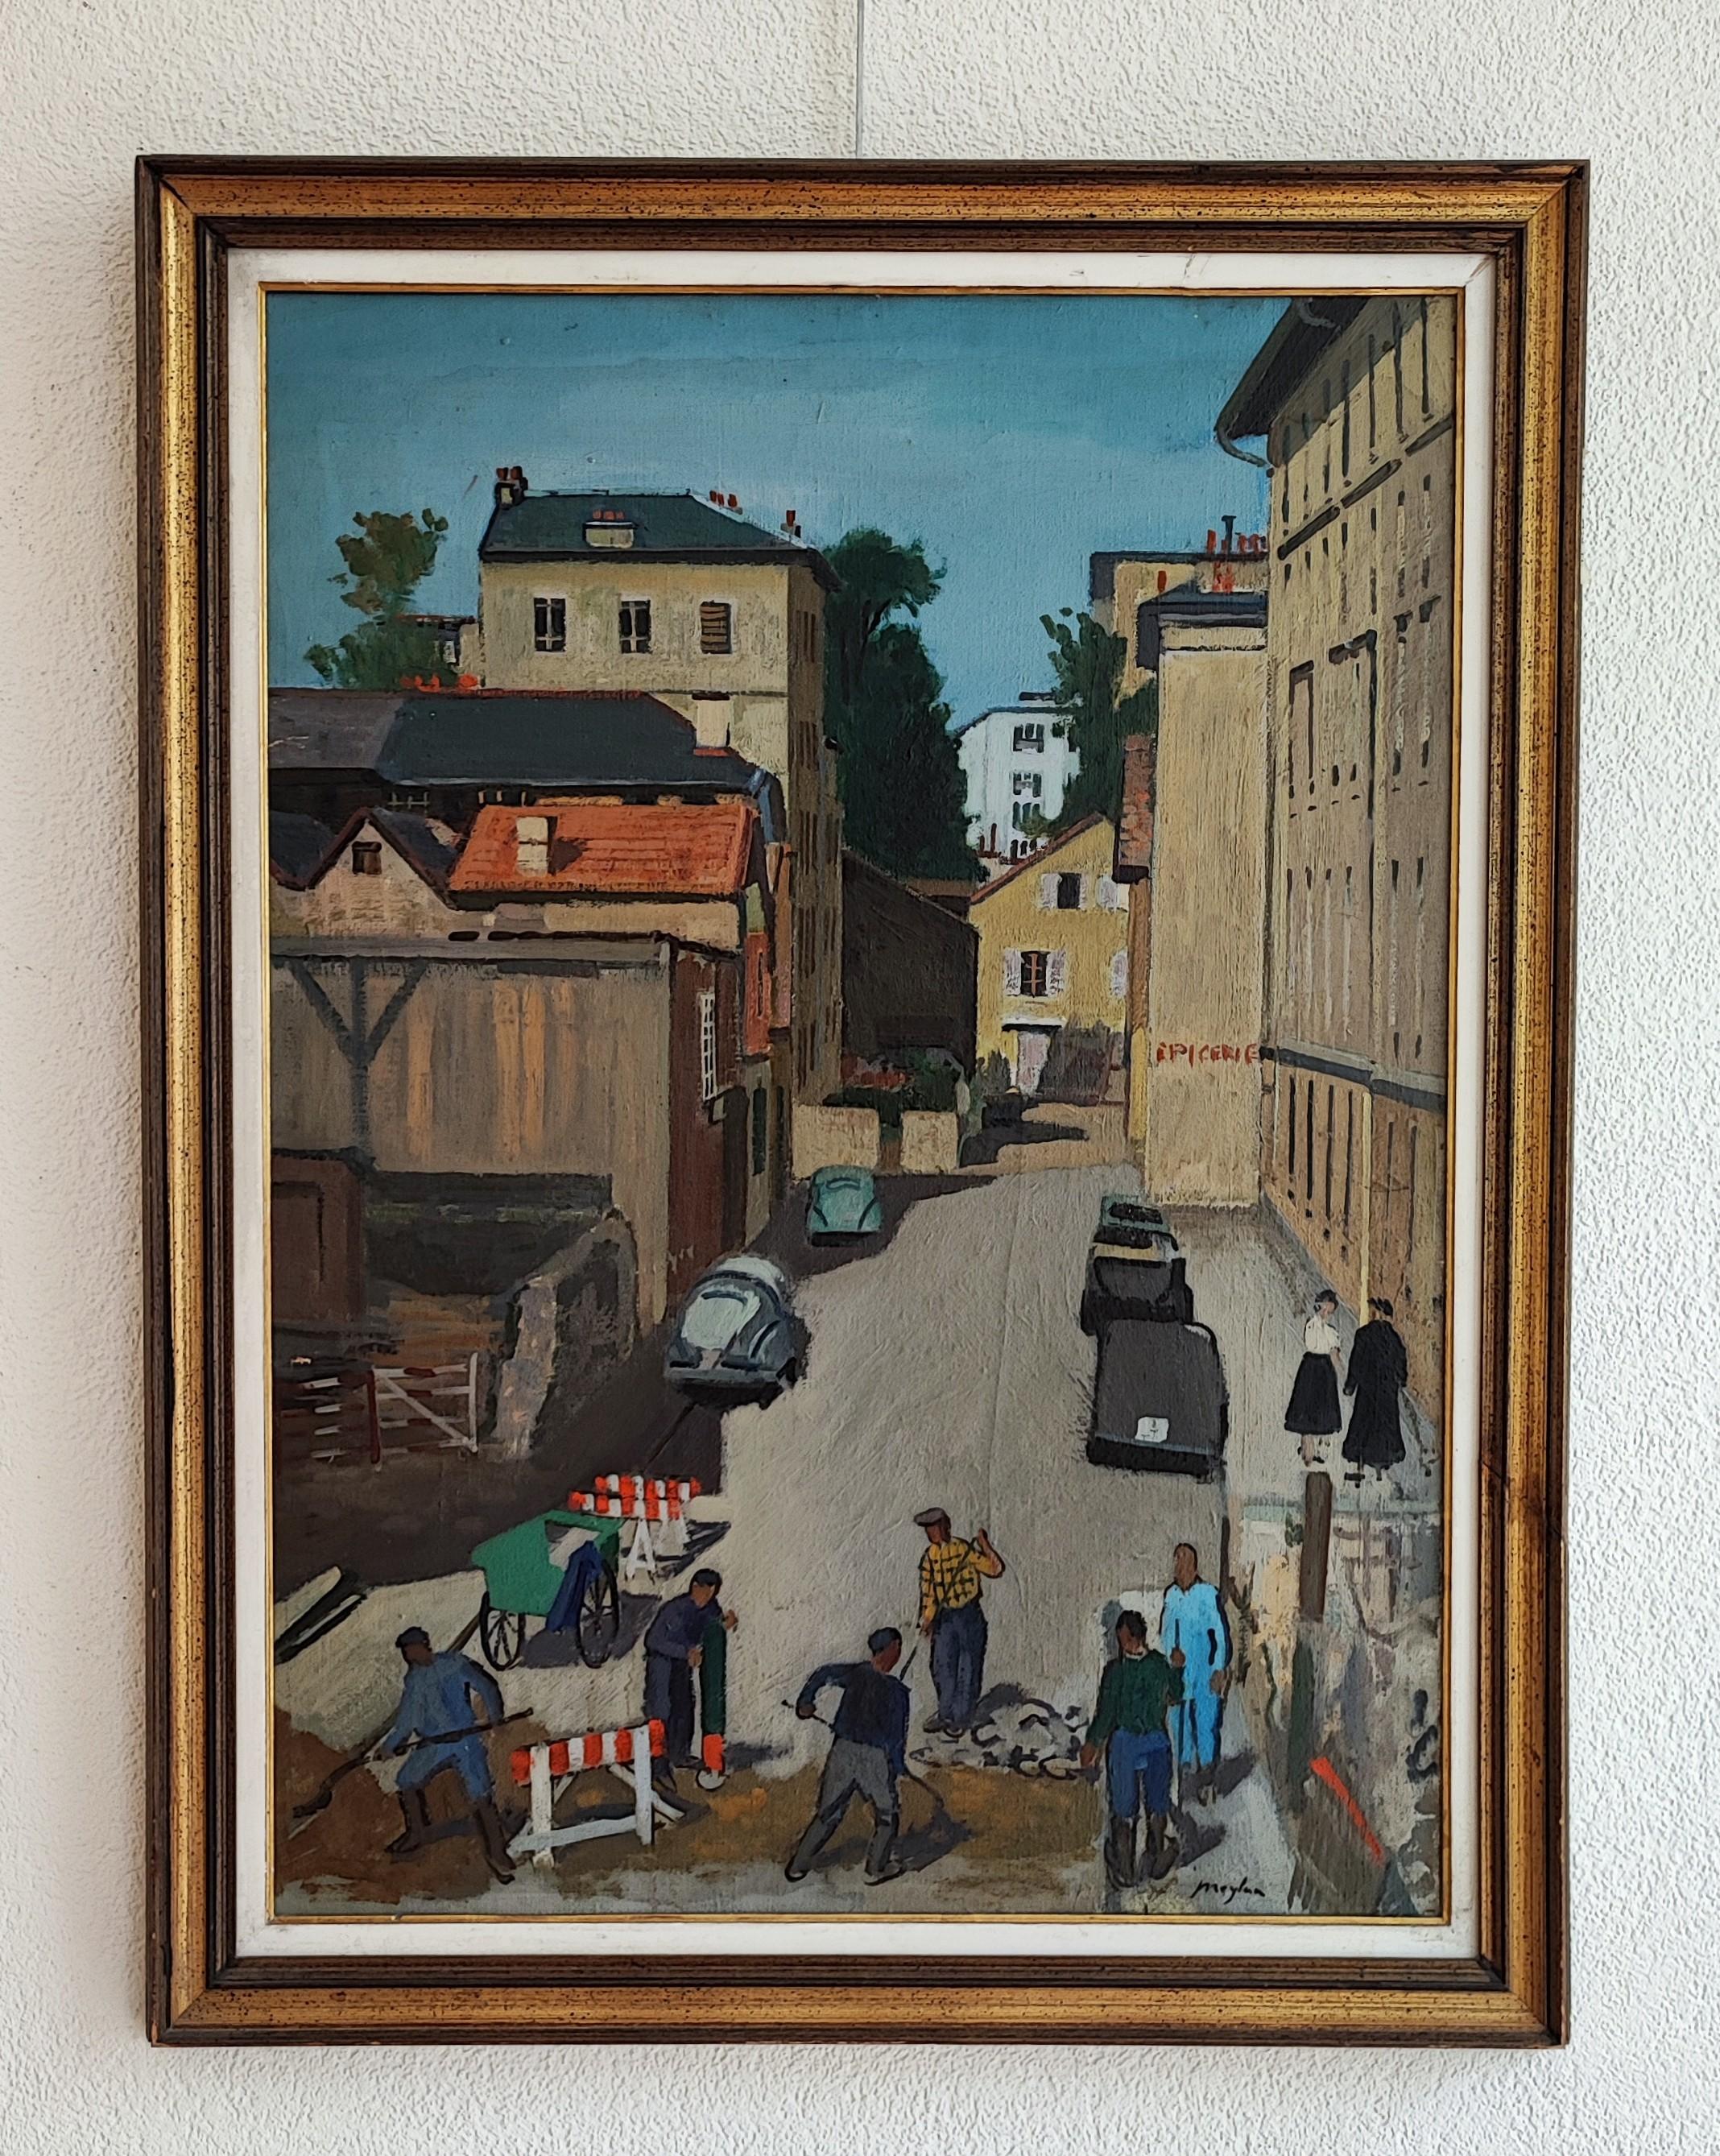 Works in the street - Painting by Henry Meylan